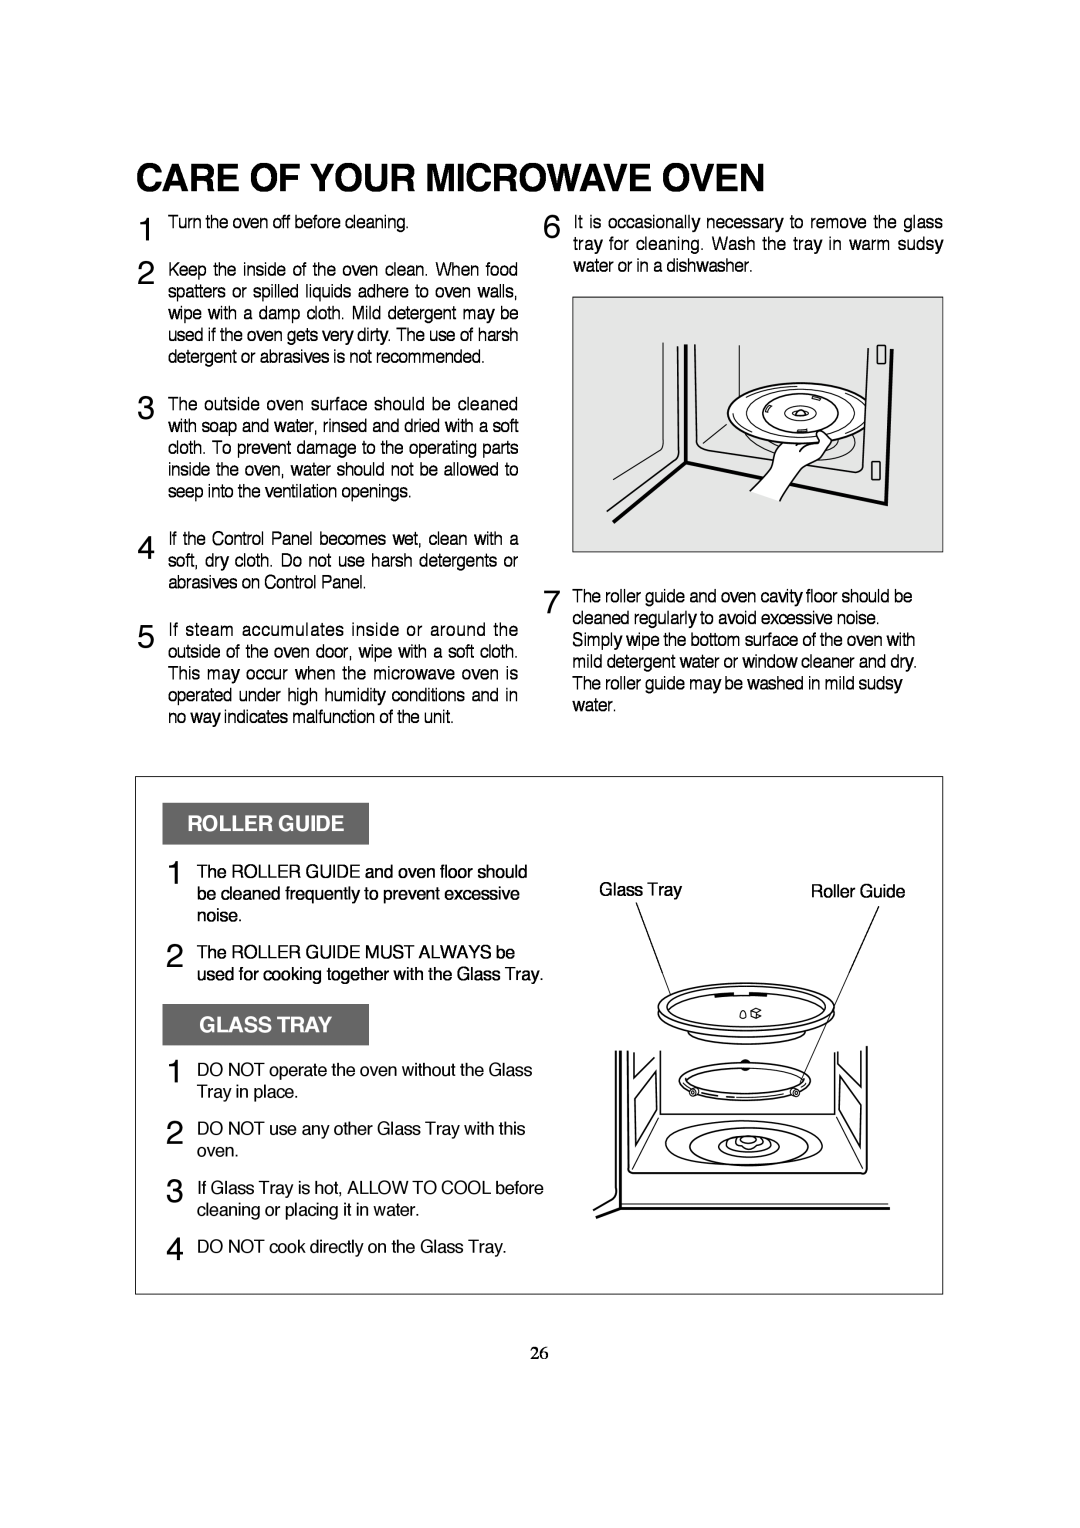 Magic Chef MCB770B instruction manual Care Of Your Microwave Oven, Roller Guide, Glass Tray 